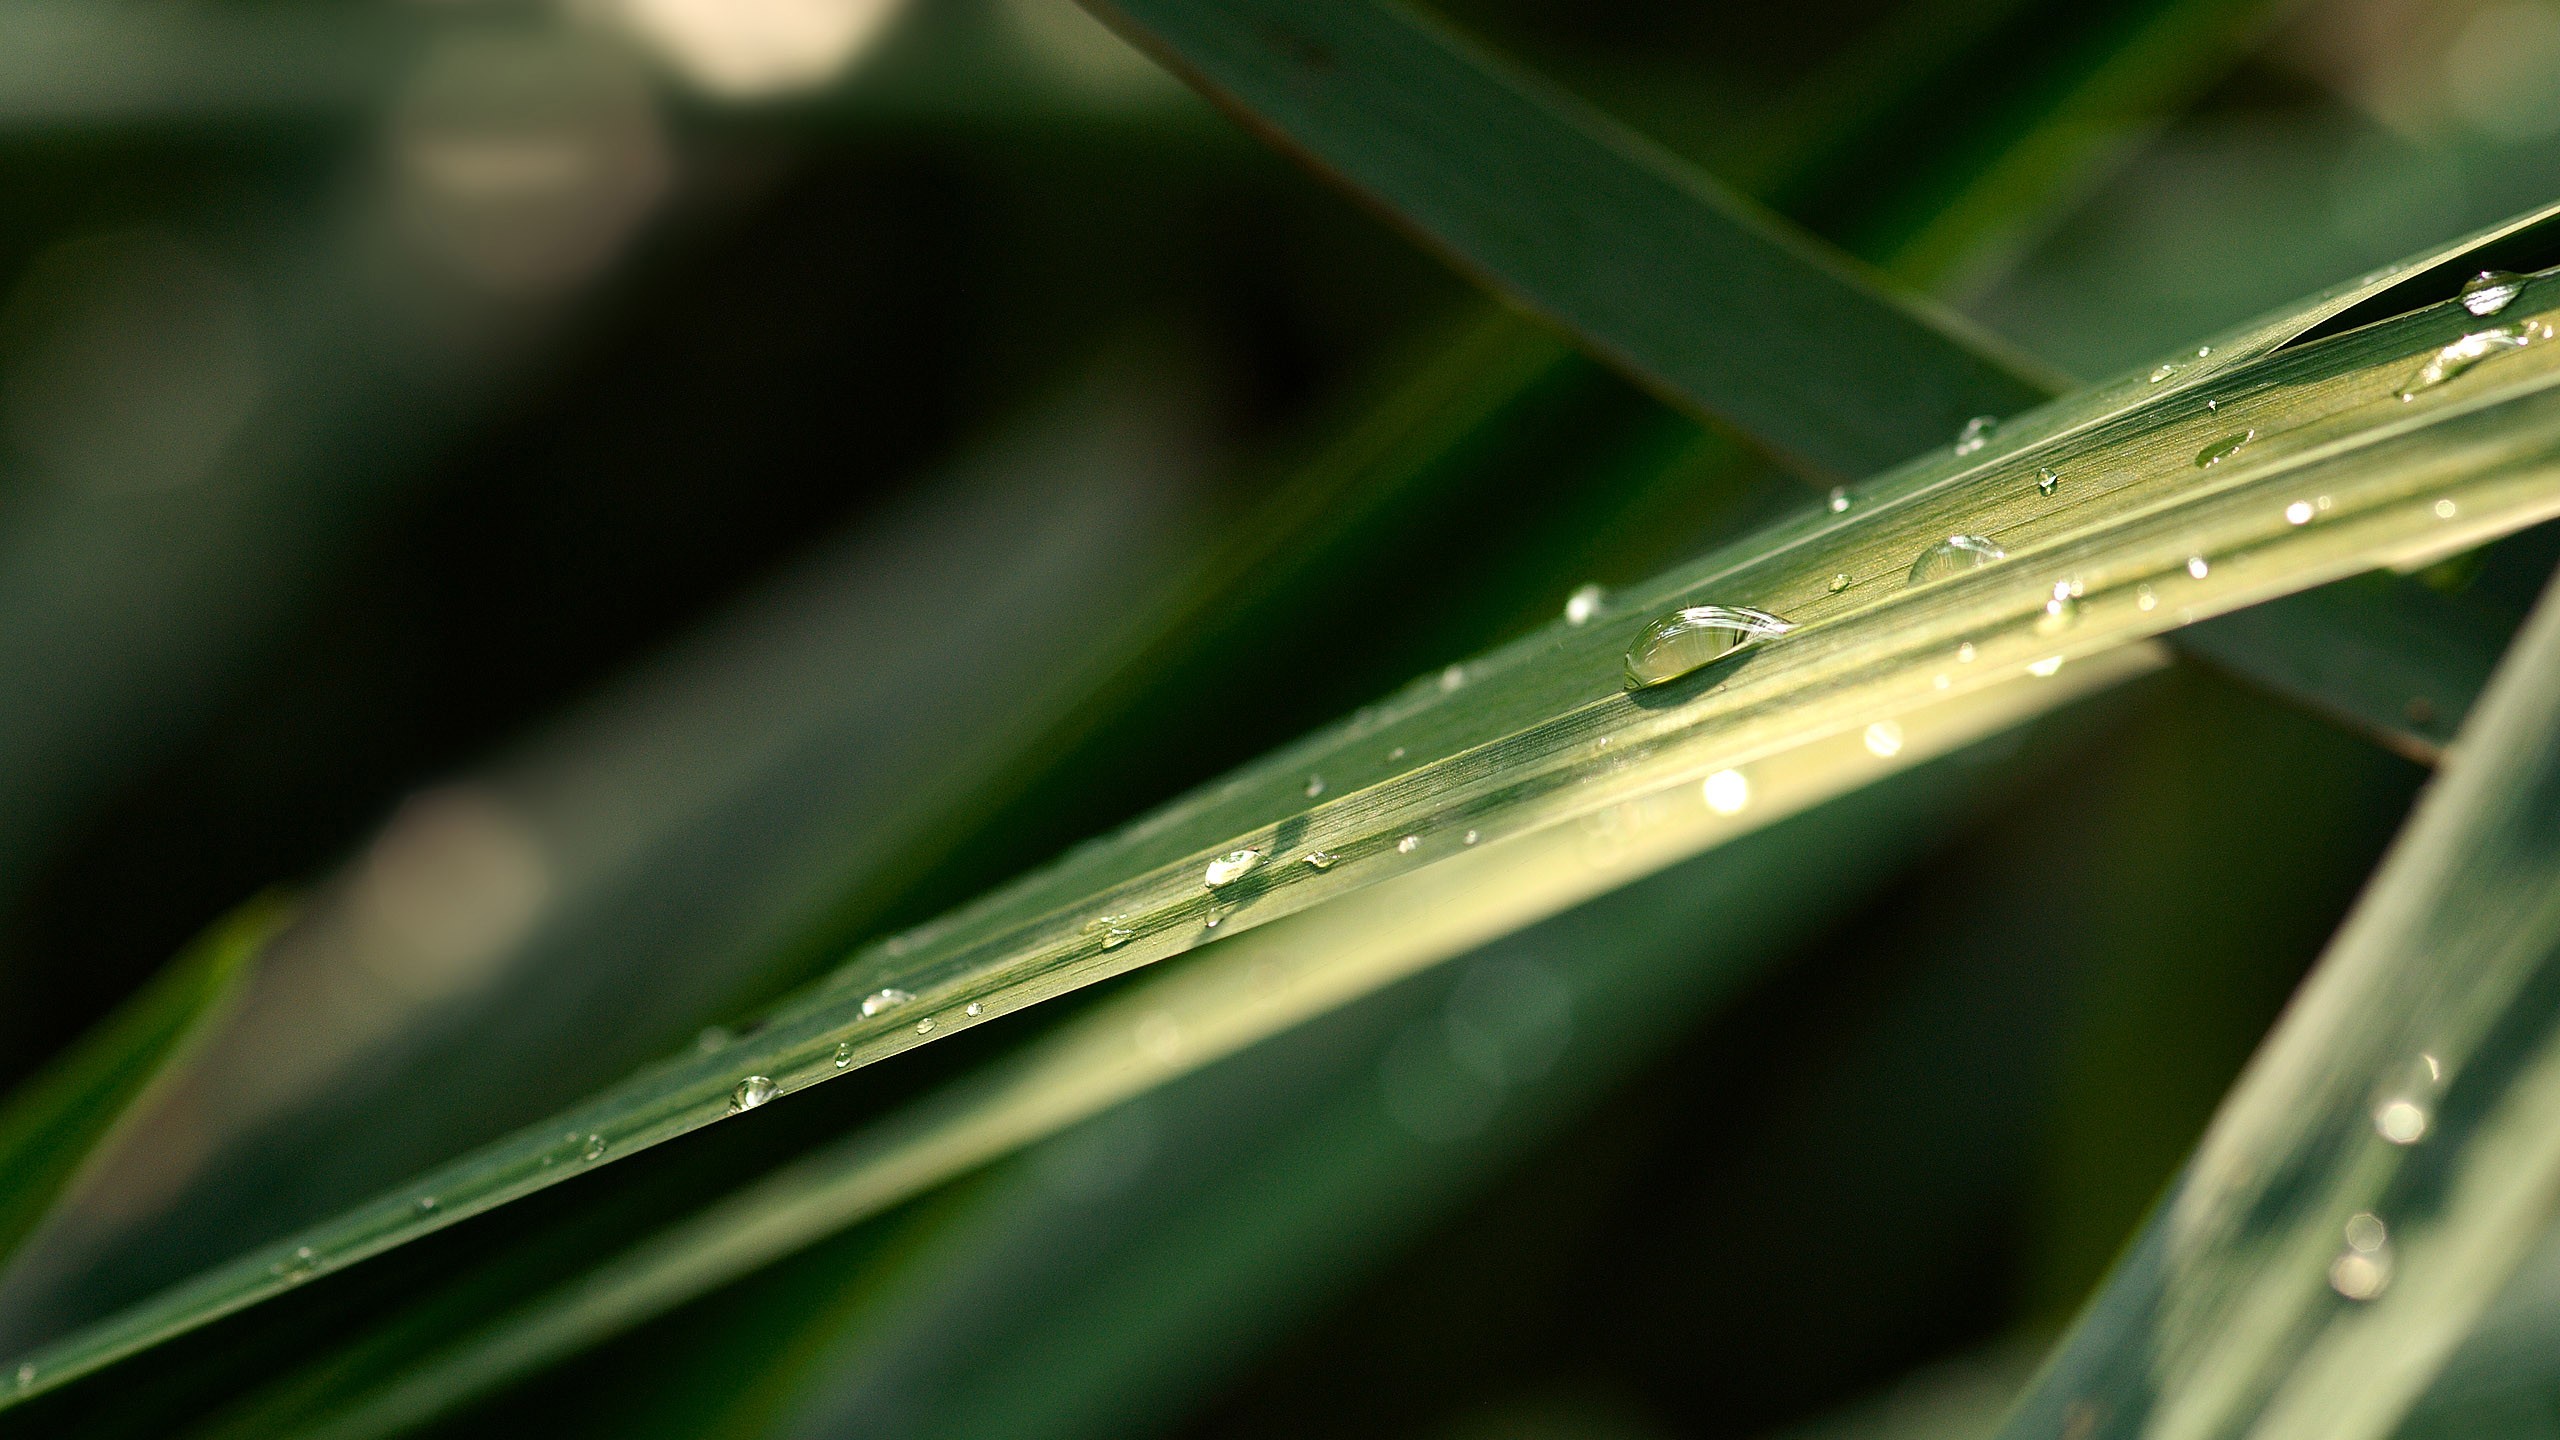 General 2560x1440 photography nature plants leaves macro water drops